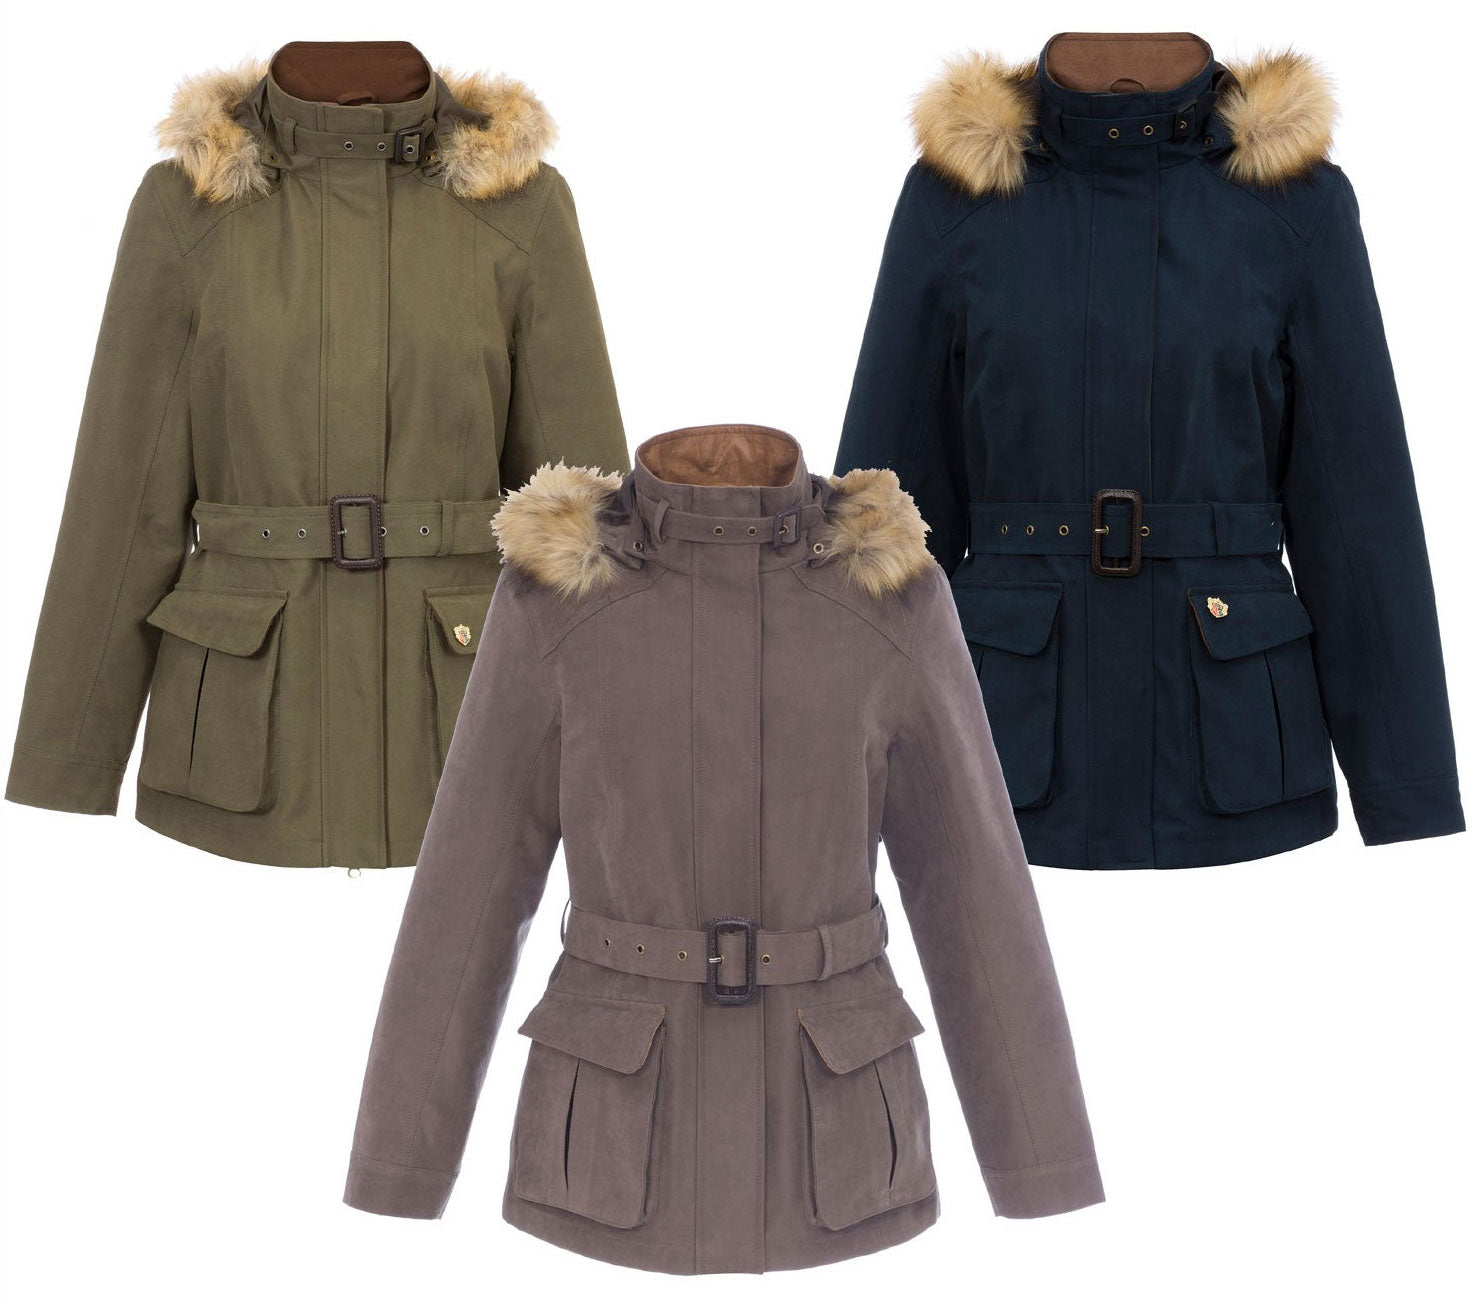 Alan Paine Berwick Jacket with Faux Fur Trim hood in three colours Brown , navy and olive